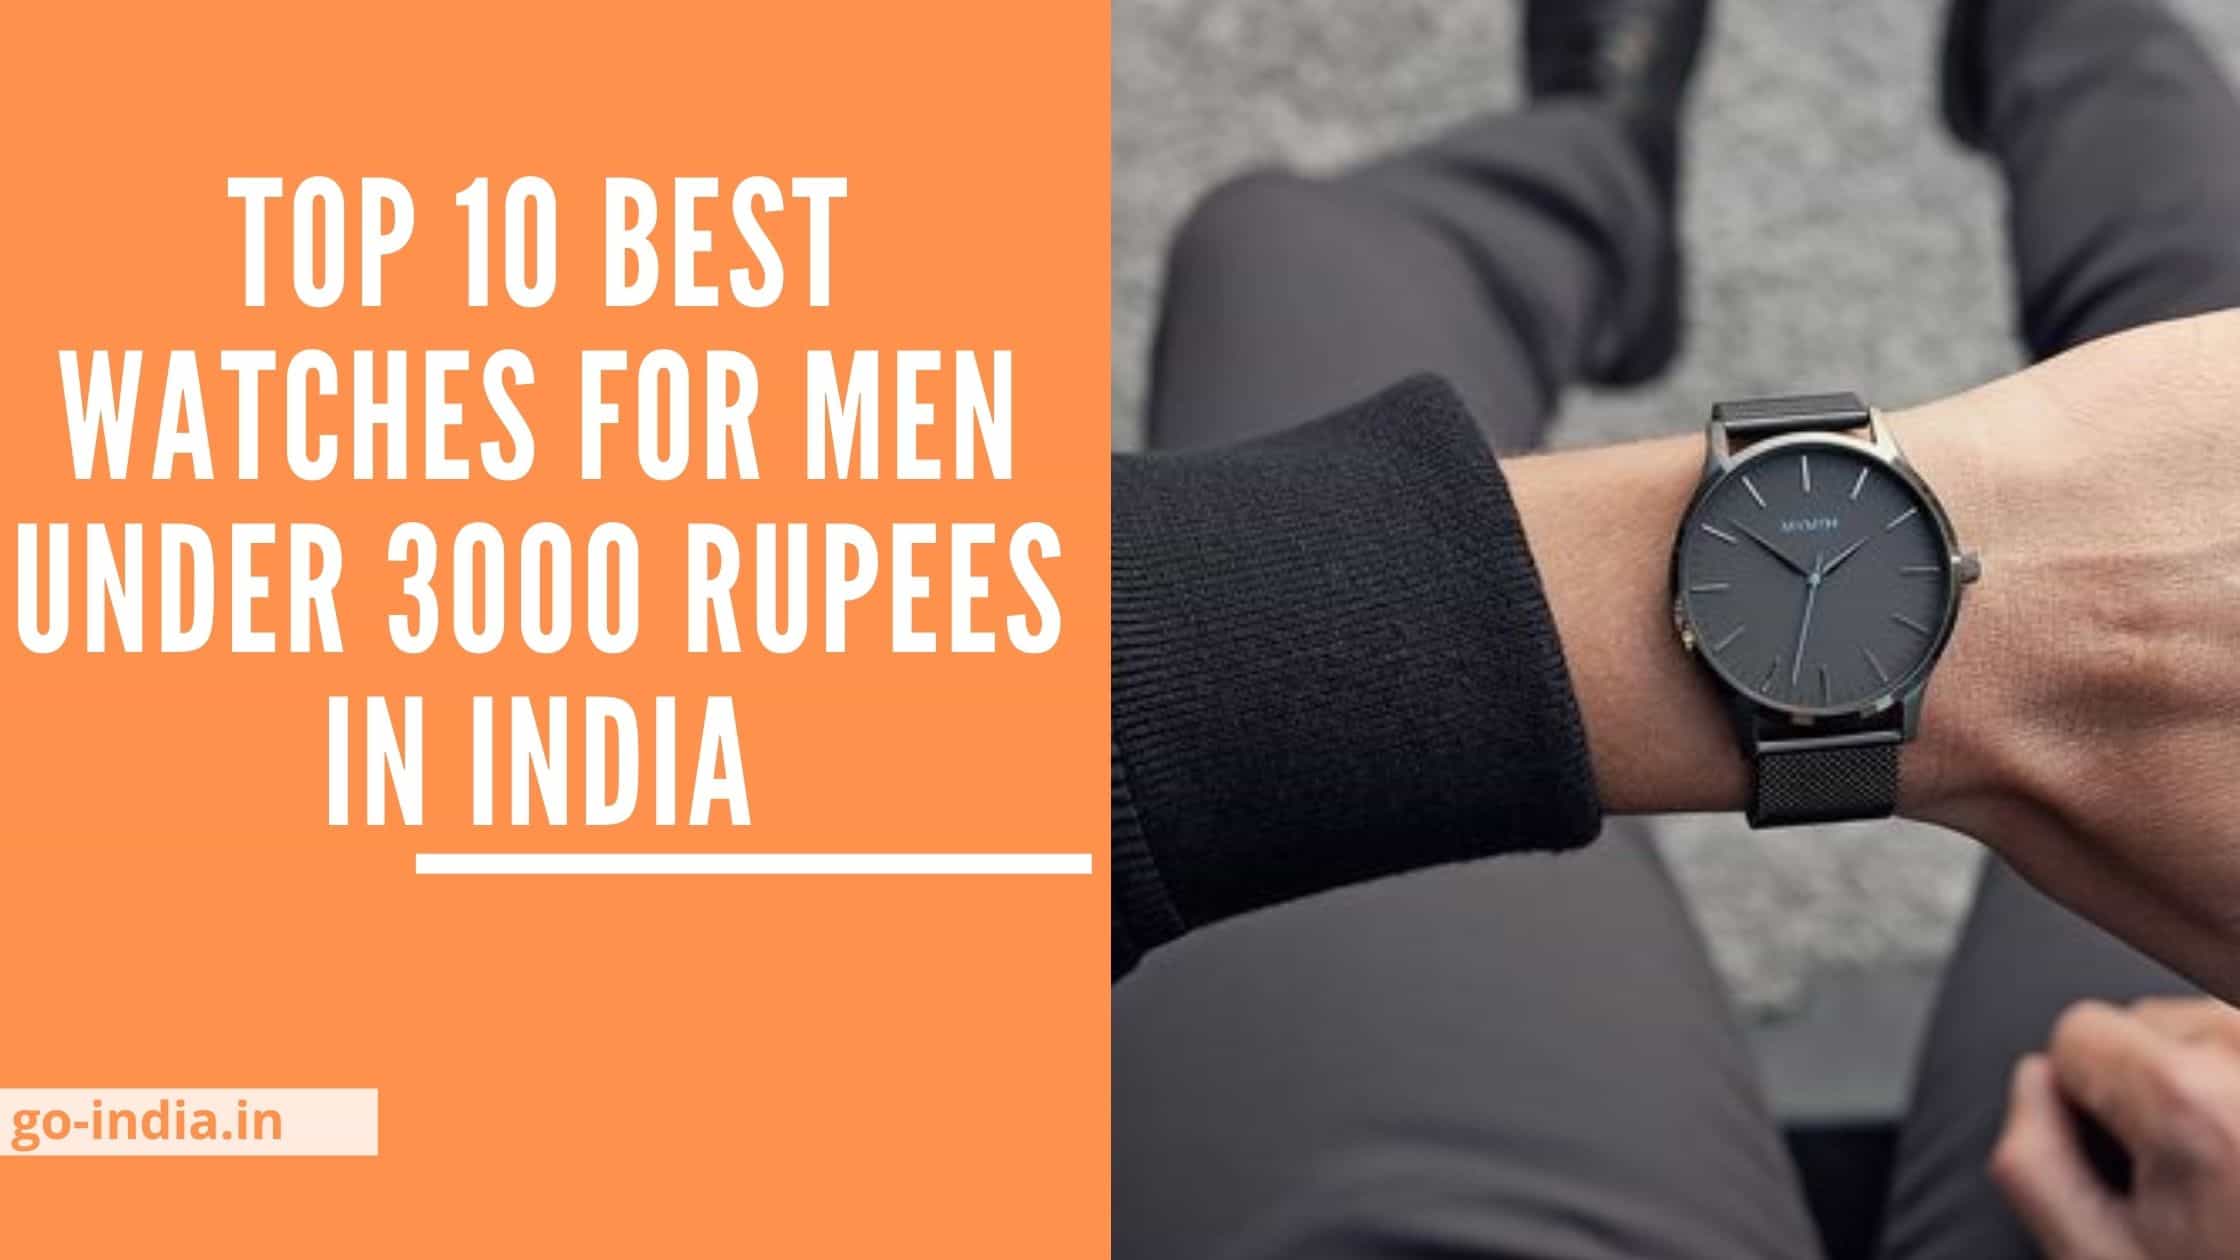 Top 10 Best Watches For Men Under 3000 Rupees in India 2022